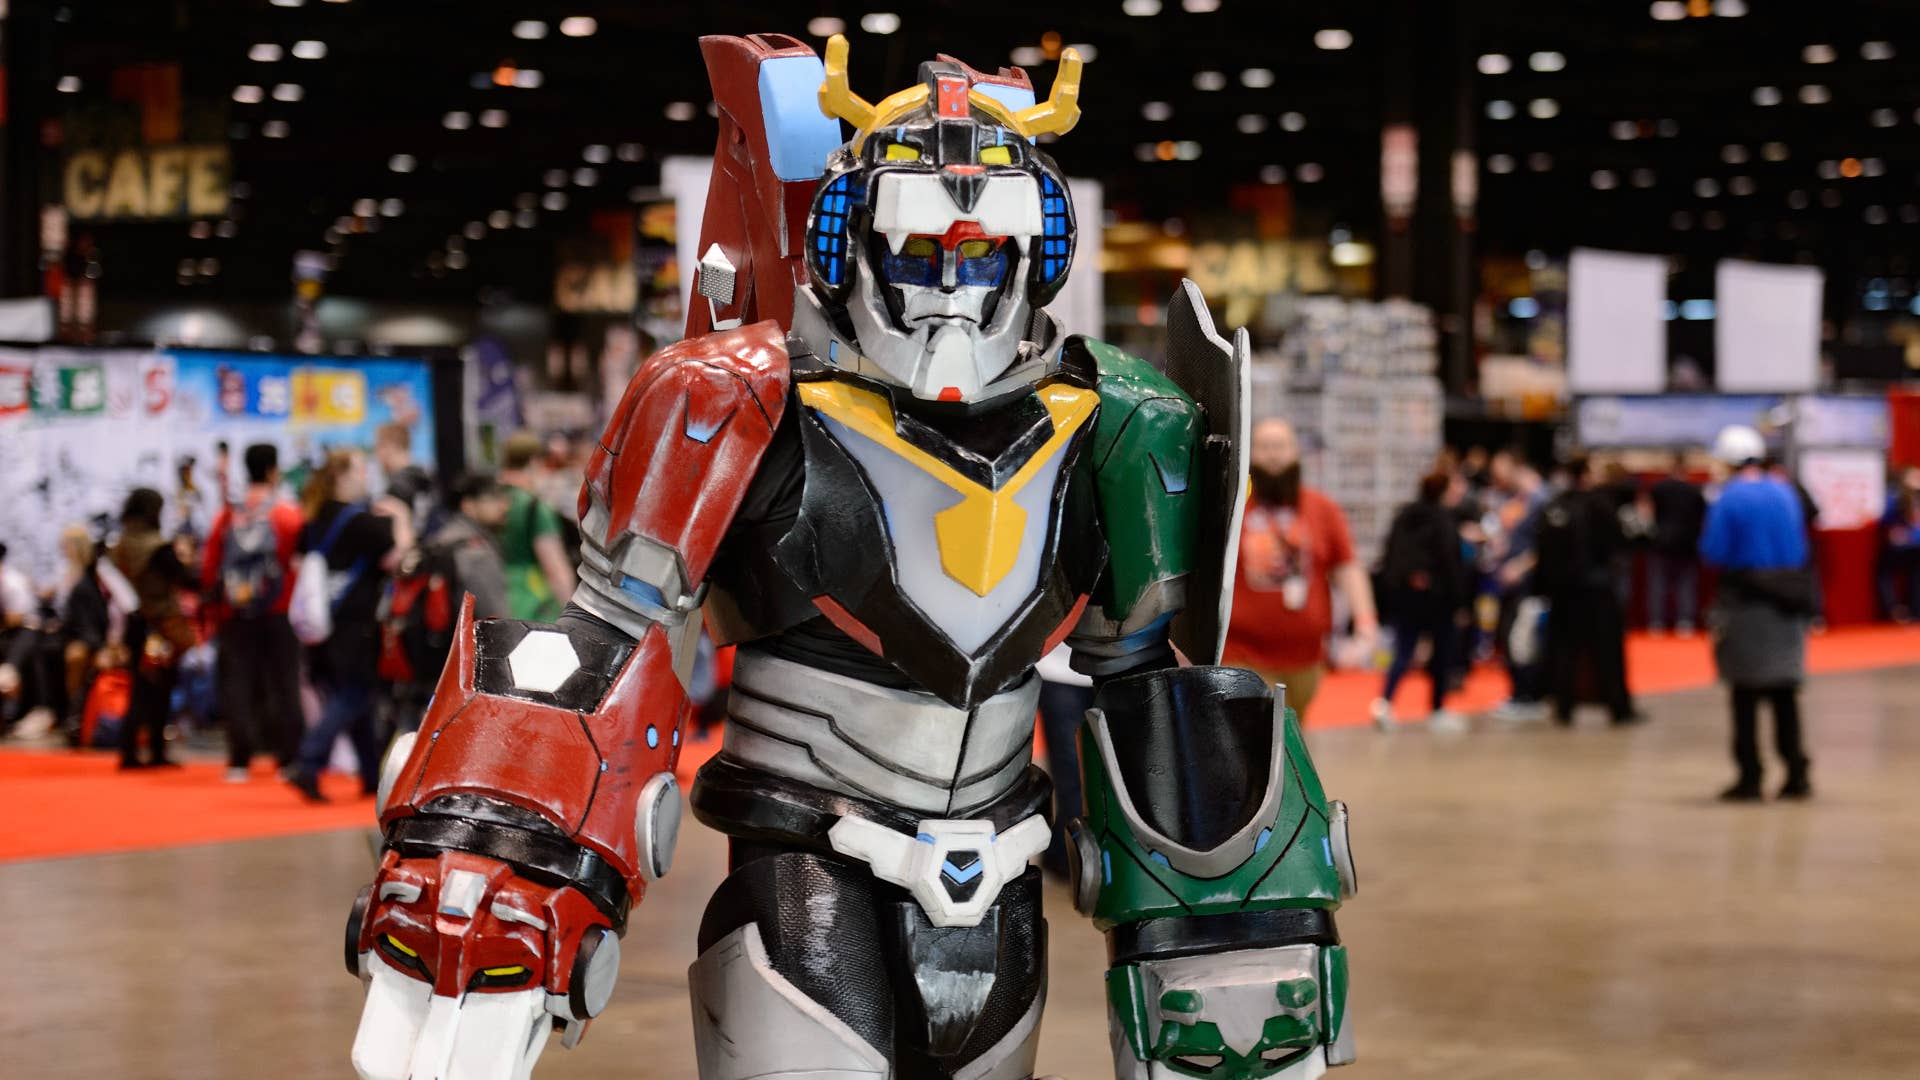 A cosplayer dressed as Voltron.